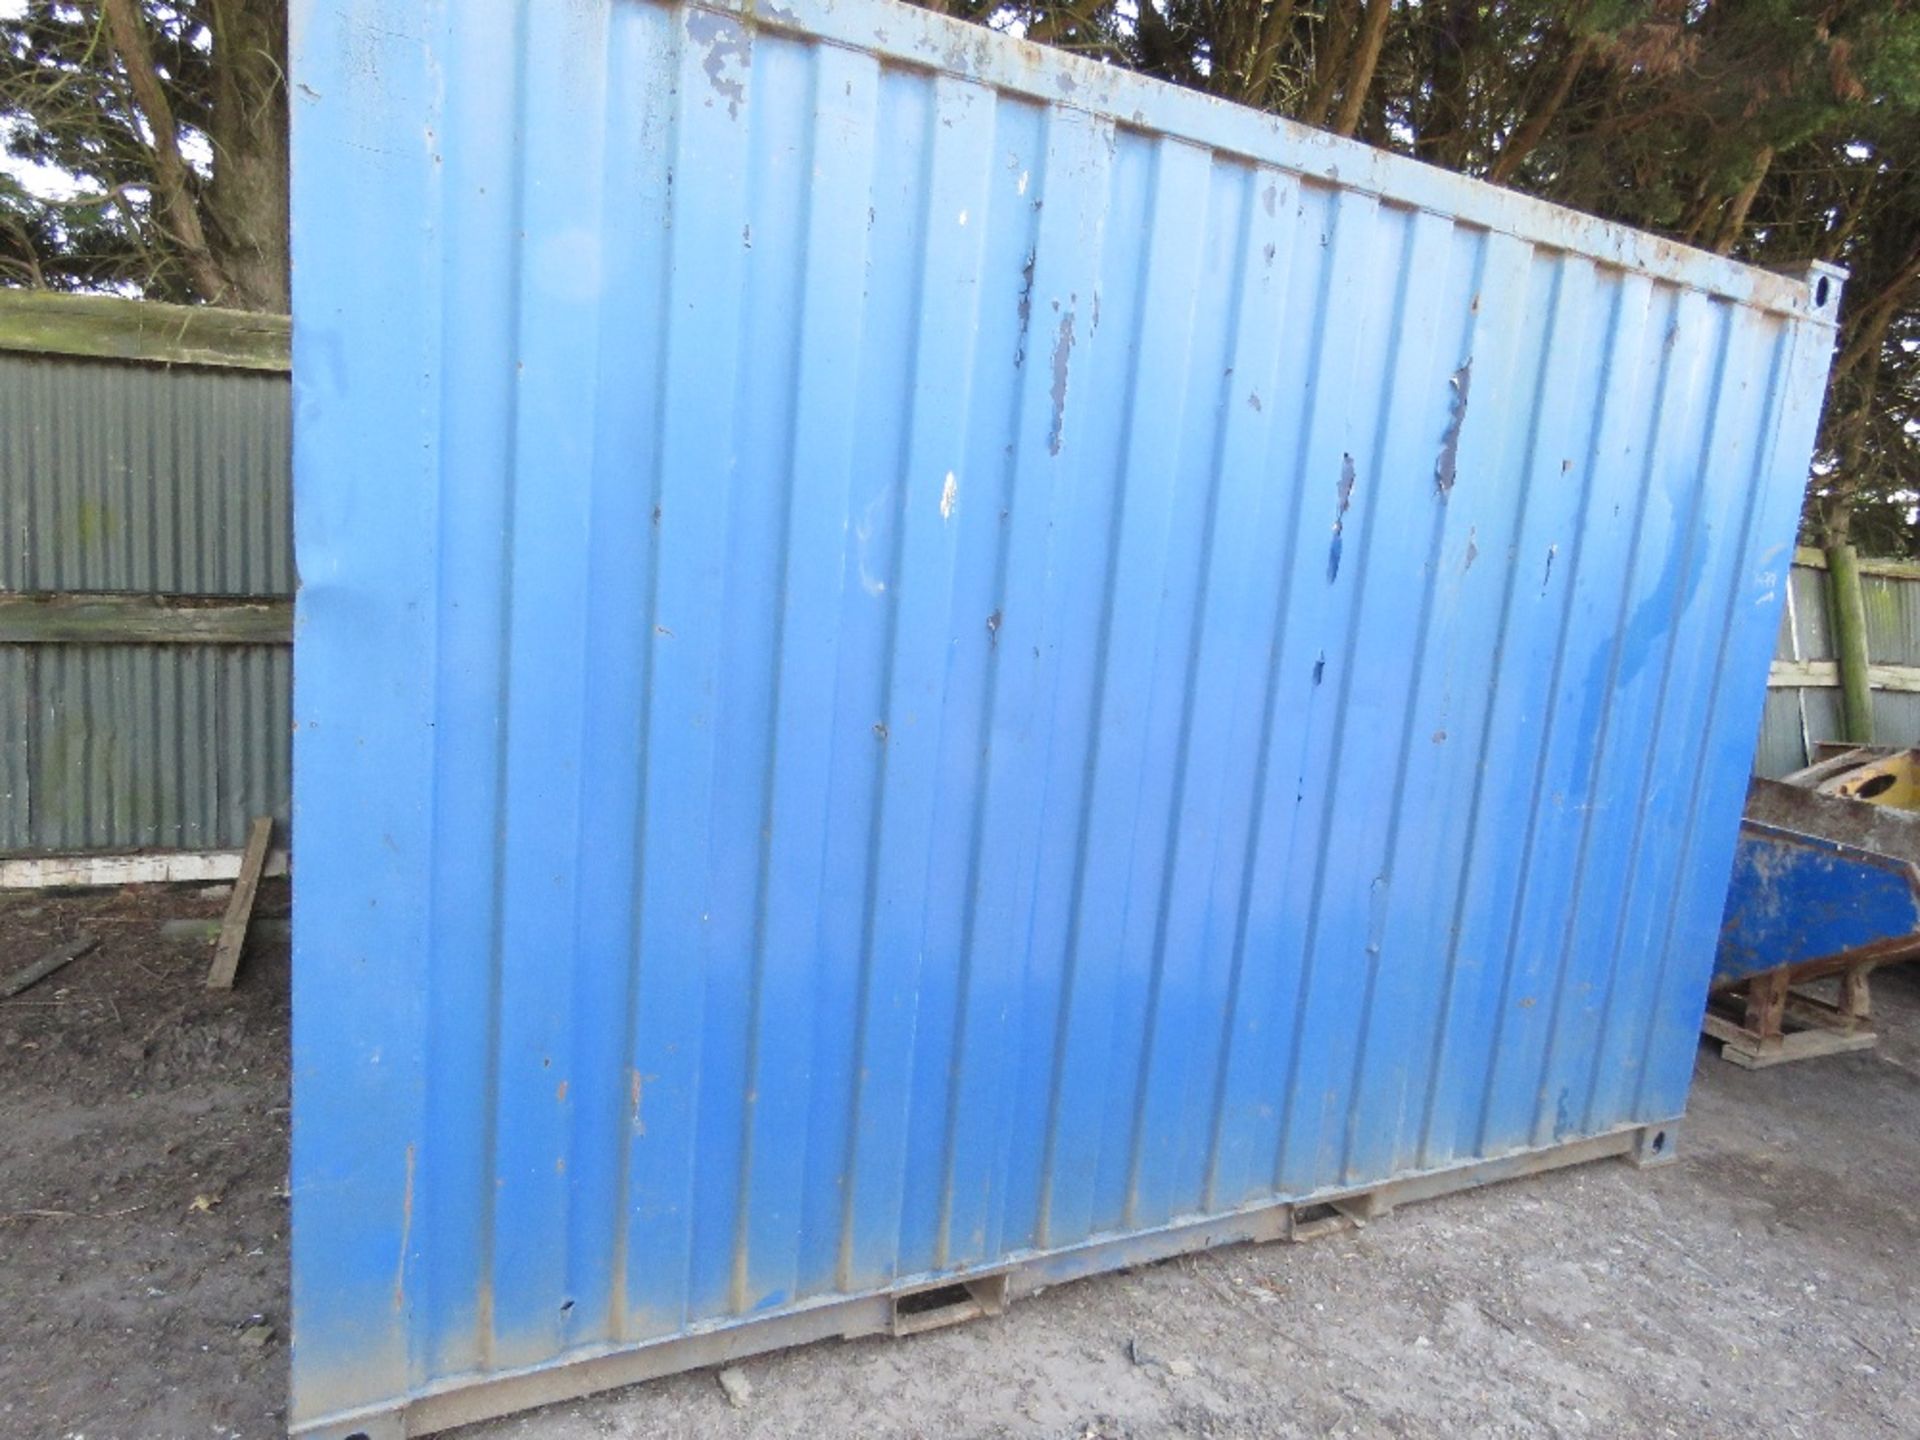 OFFICE CONTAINER UNIT, 12FT X 8FT APPROX. NO KEY BUT UNLOCKED. WITH FORK POCKETS SO WE CAN LOAD ONTO